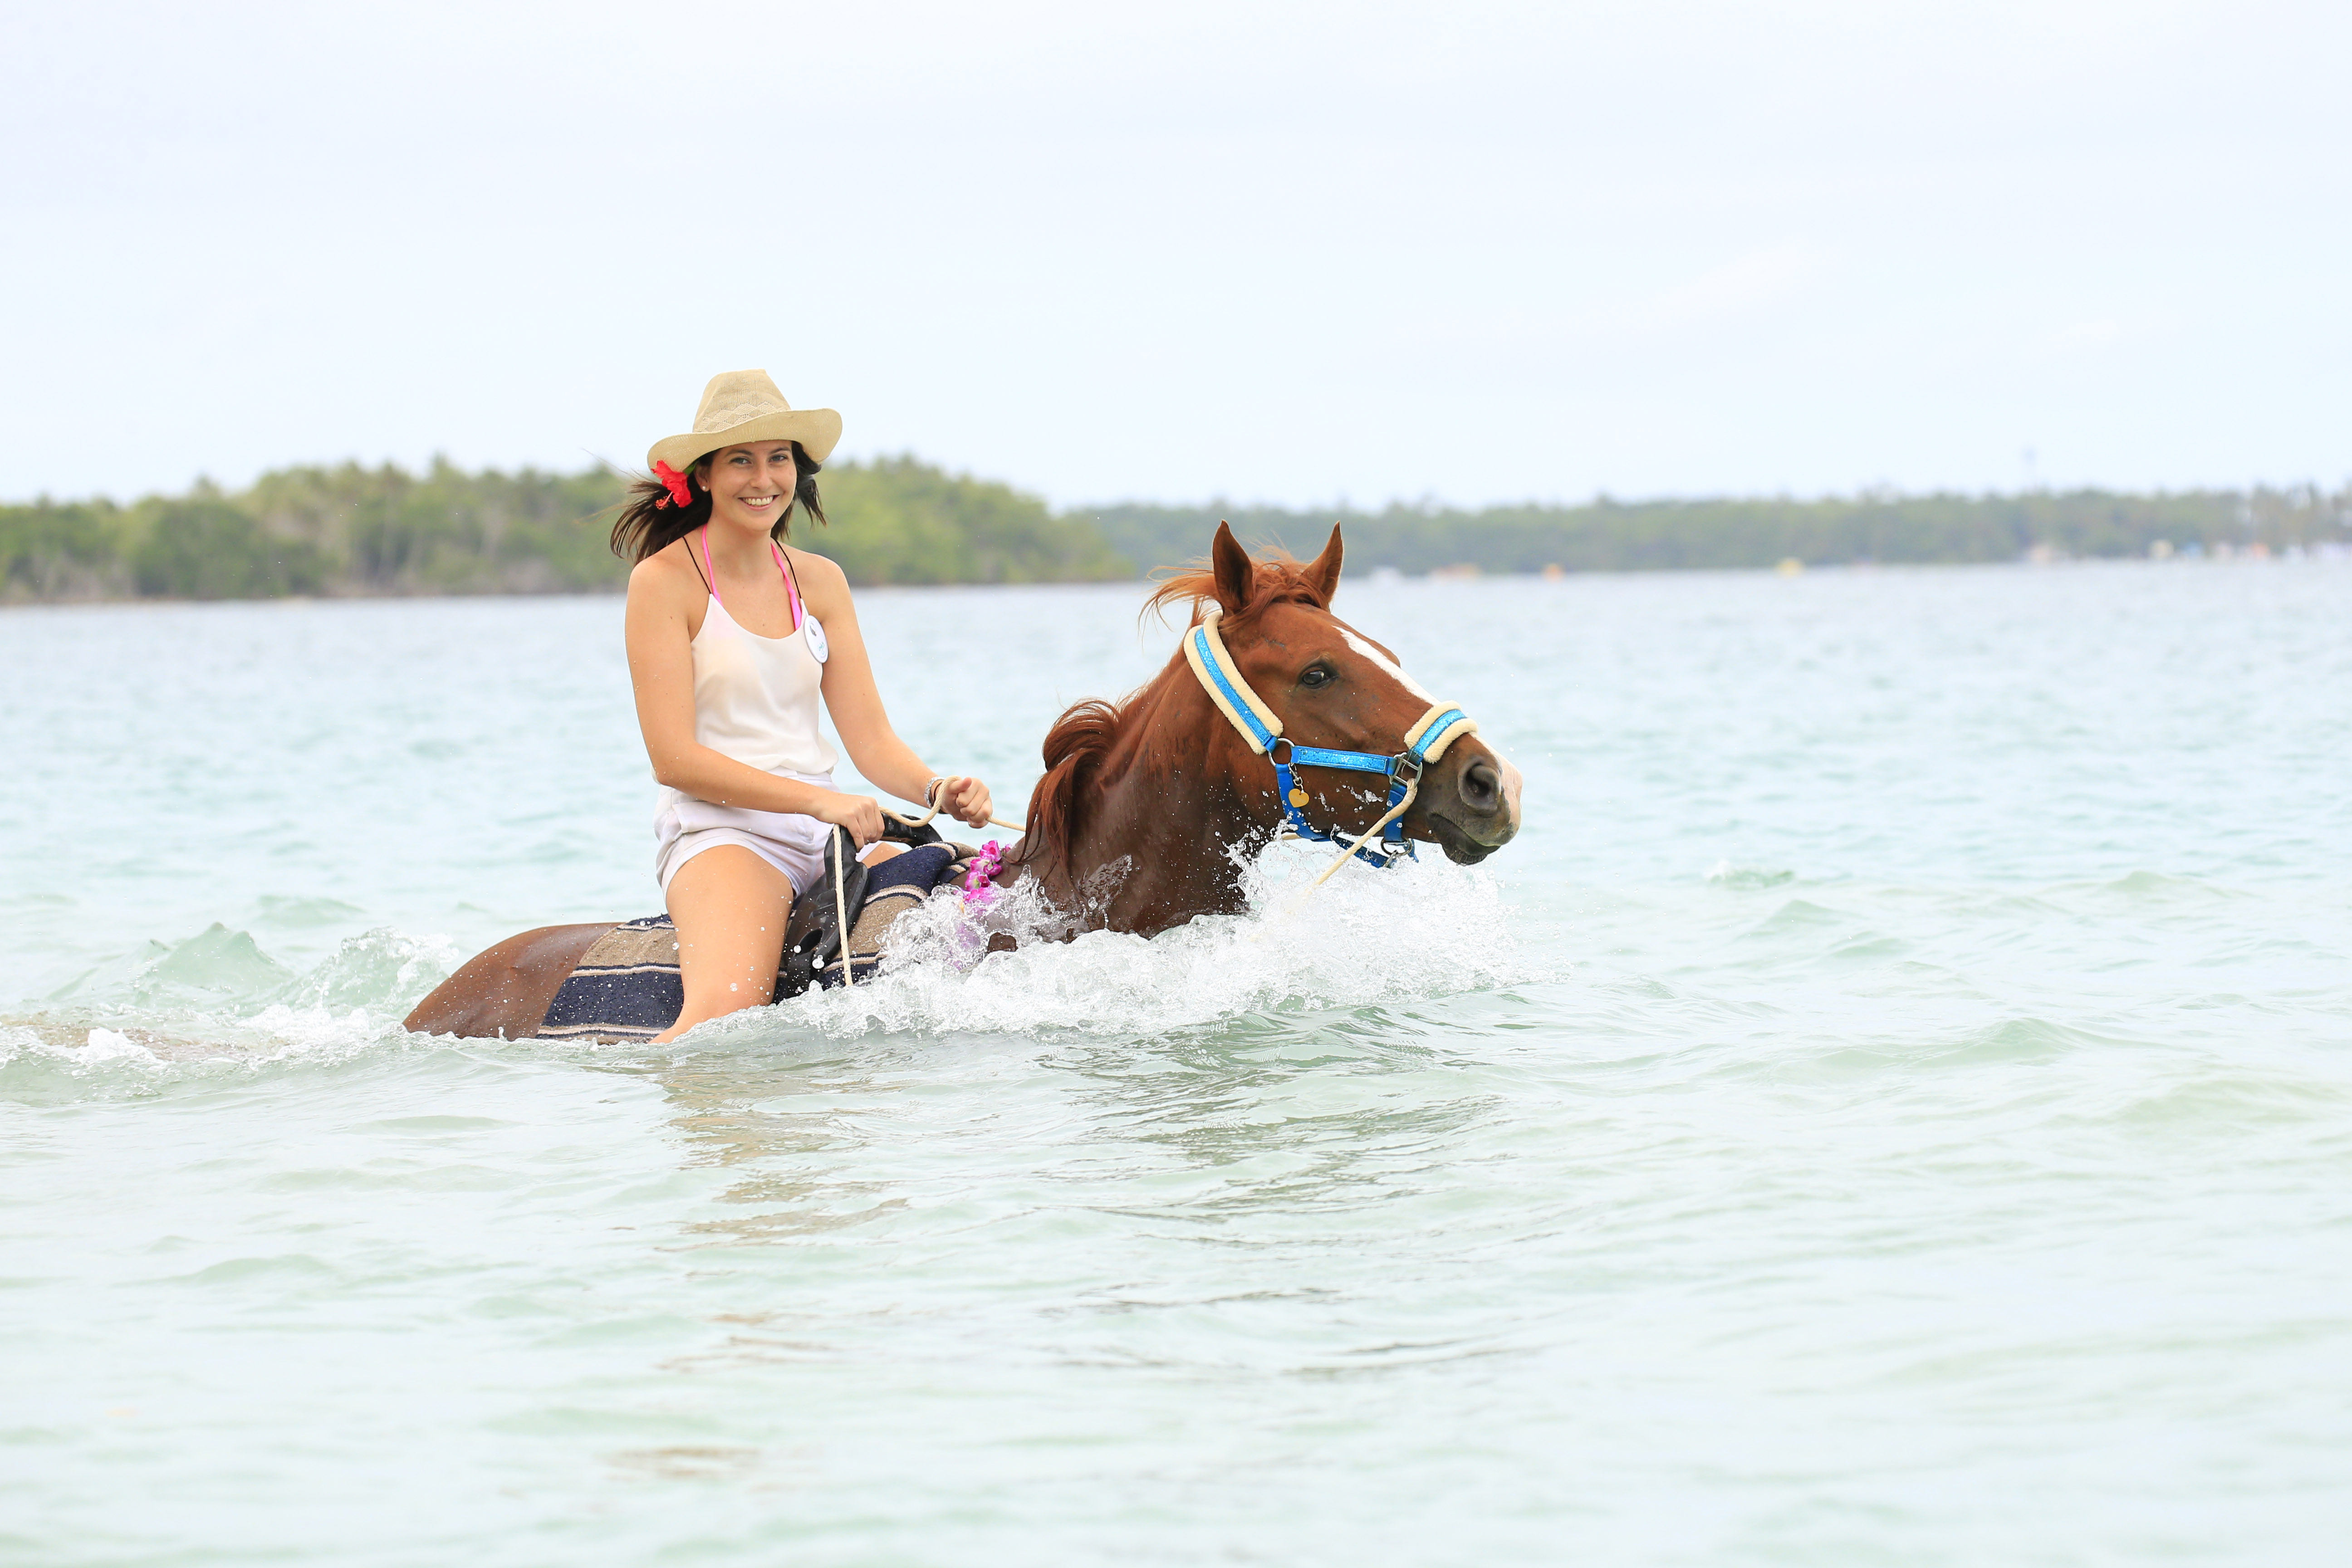 Trinidad and Tobago girl on horse in the water